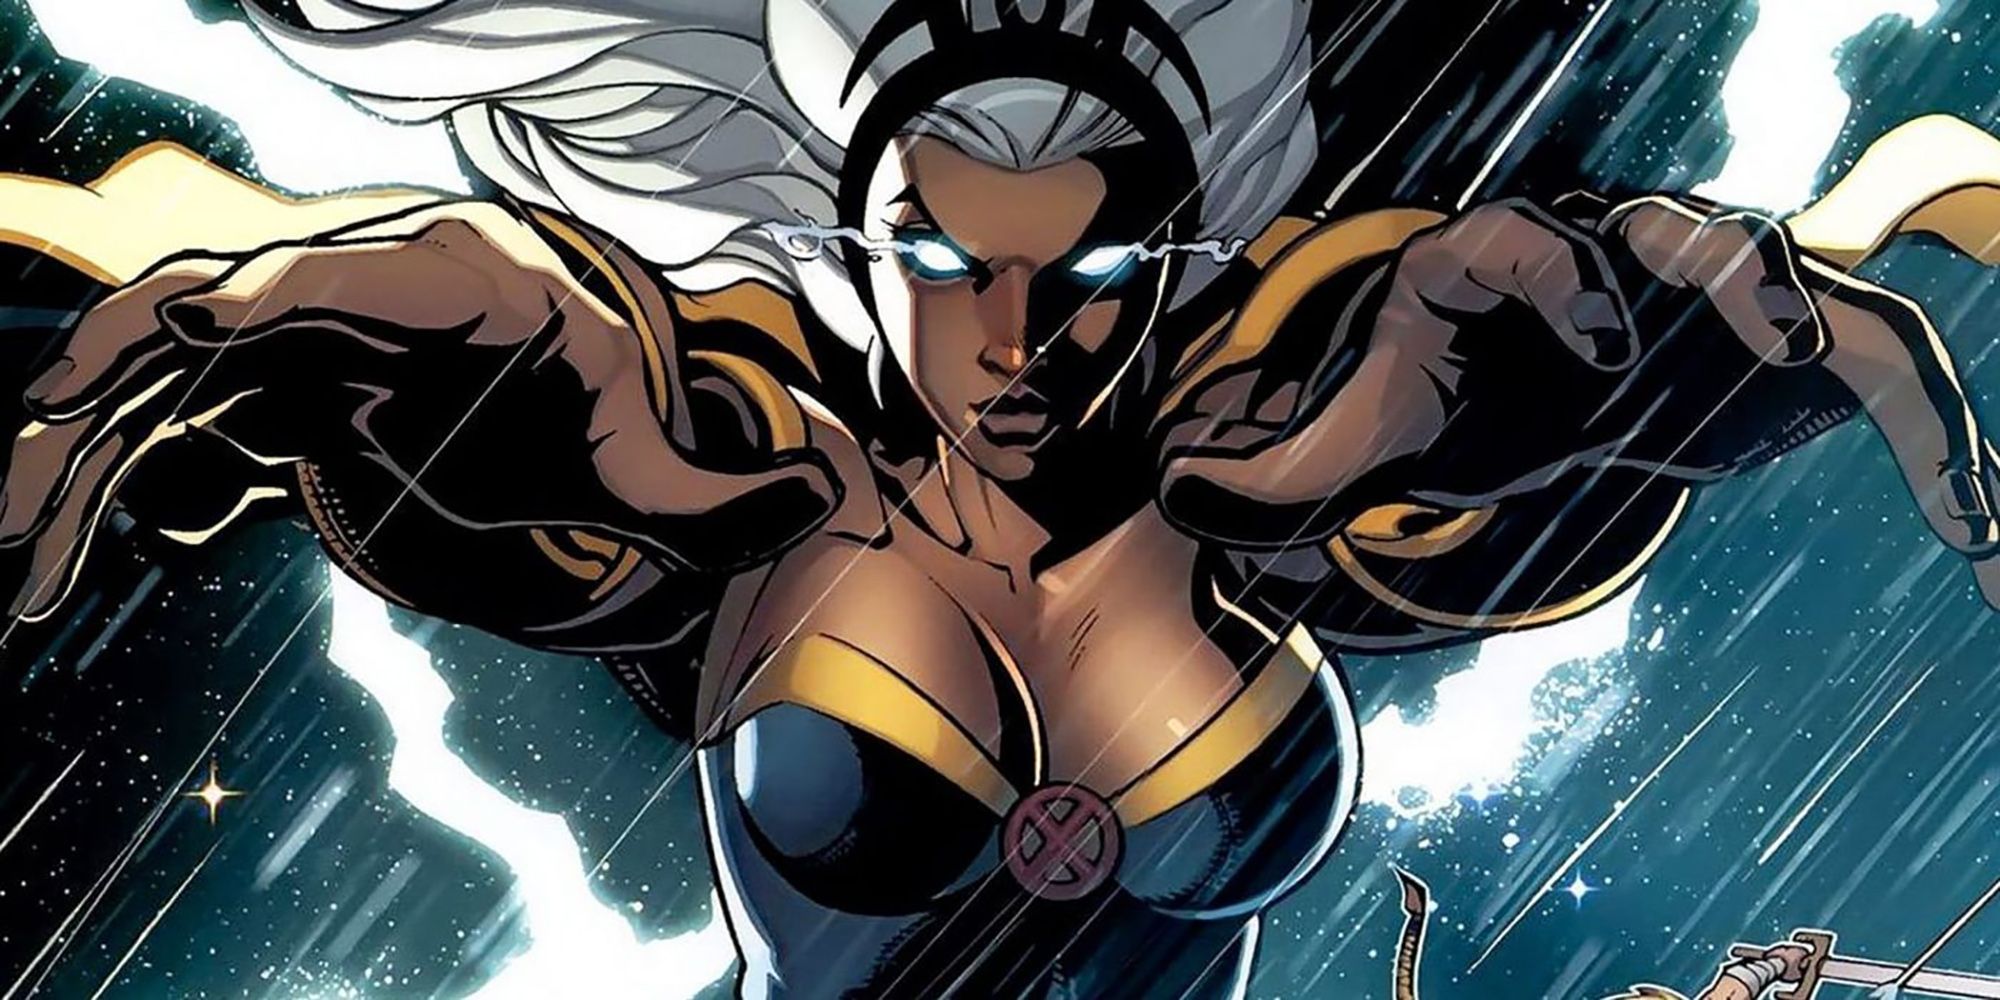 Storm, a mutant that controls the weather, causes an intense downpour in X-Men.